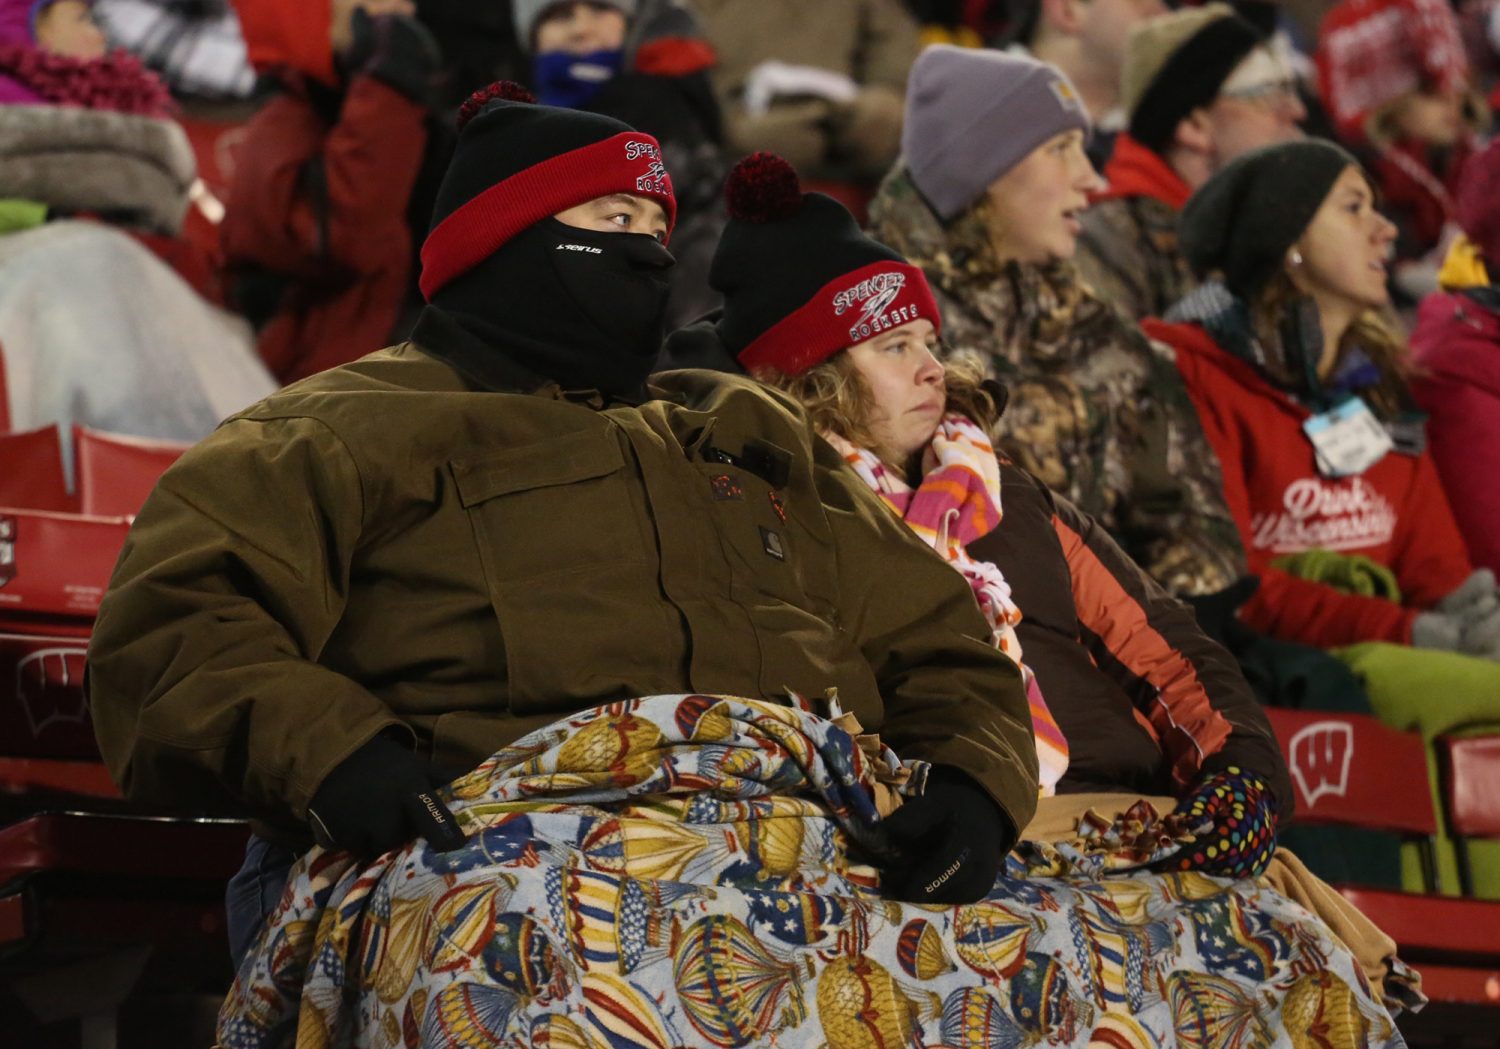 Joel Cieslinski and his wife Melissa of Spencer are bundled up against the cold as the Rockets lost to Amherst 42-0 in the WIAA Division 5 State Championship Game at Camp Randall Stadium in Madison, Thursday, Nov. 19, 2015.